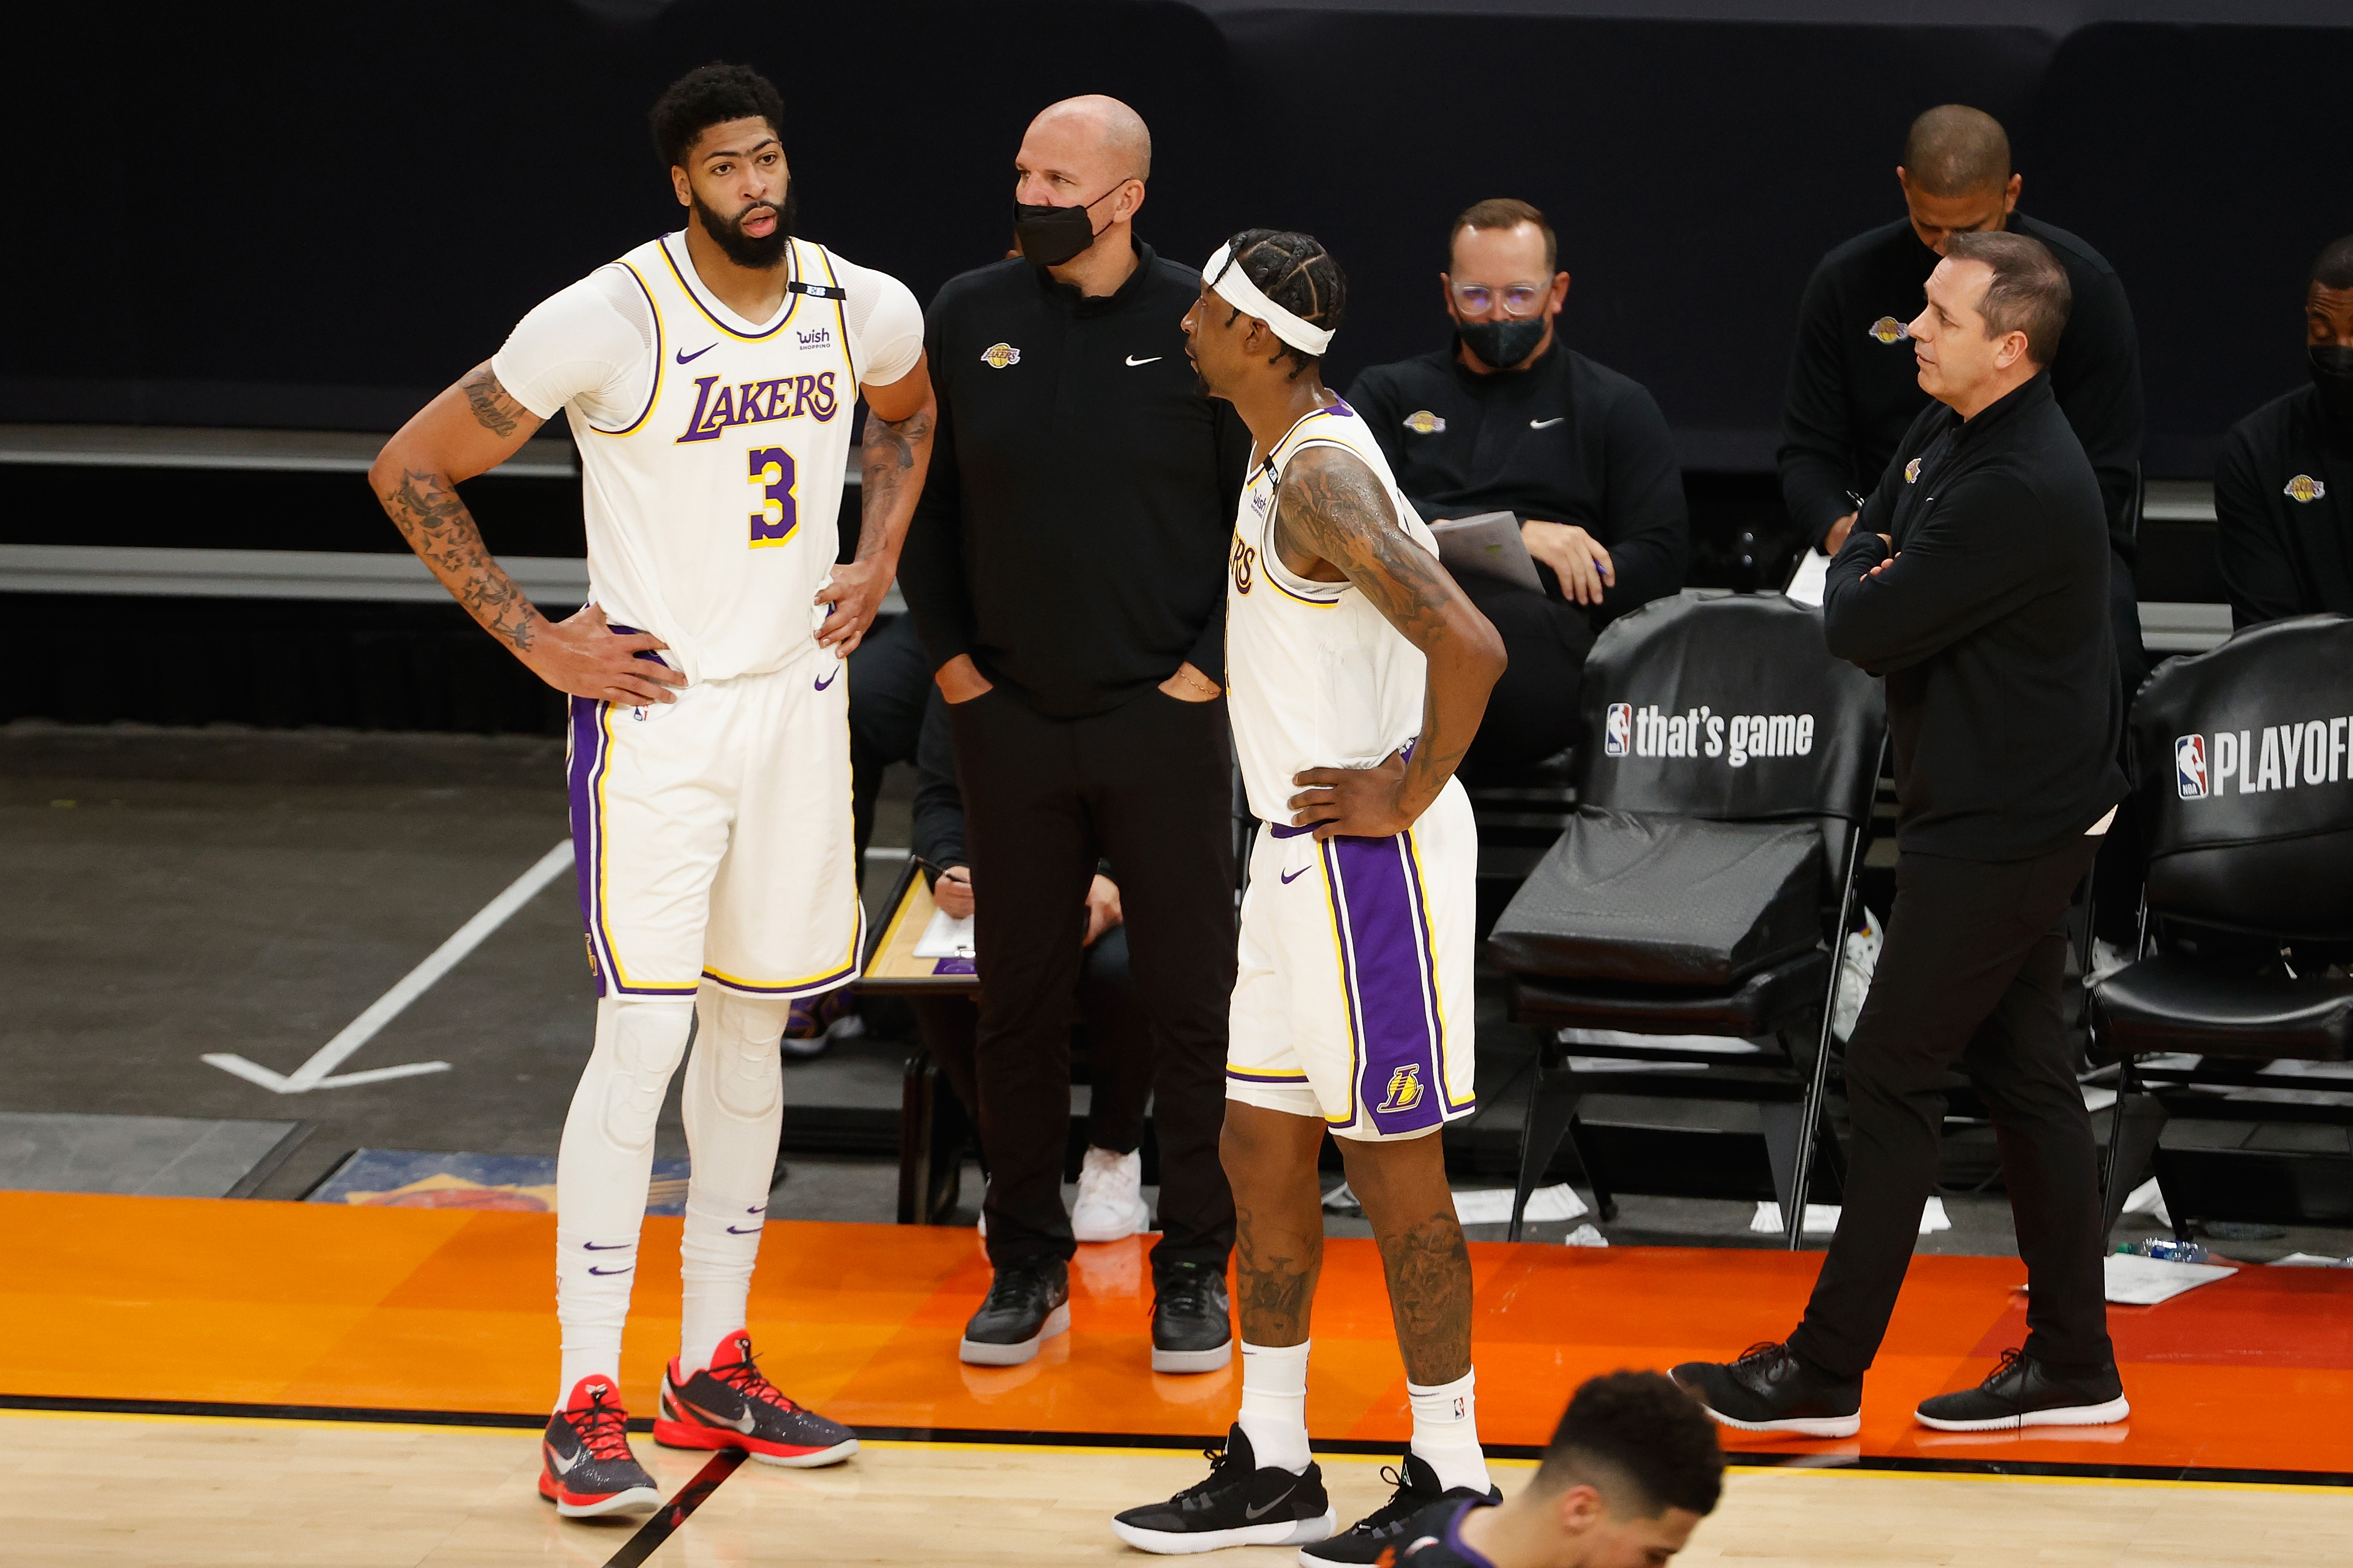 Los Angeles Lakers v Phoenix Suns - Game One